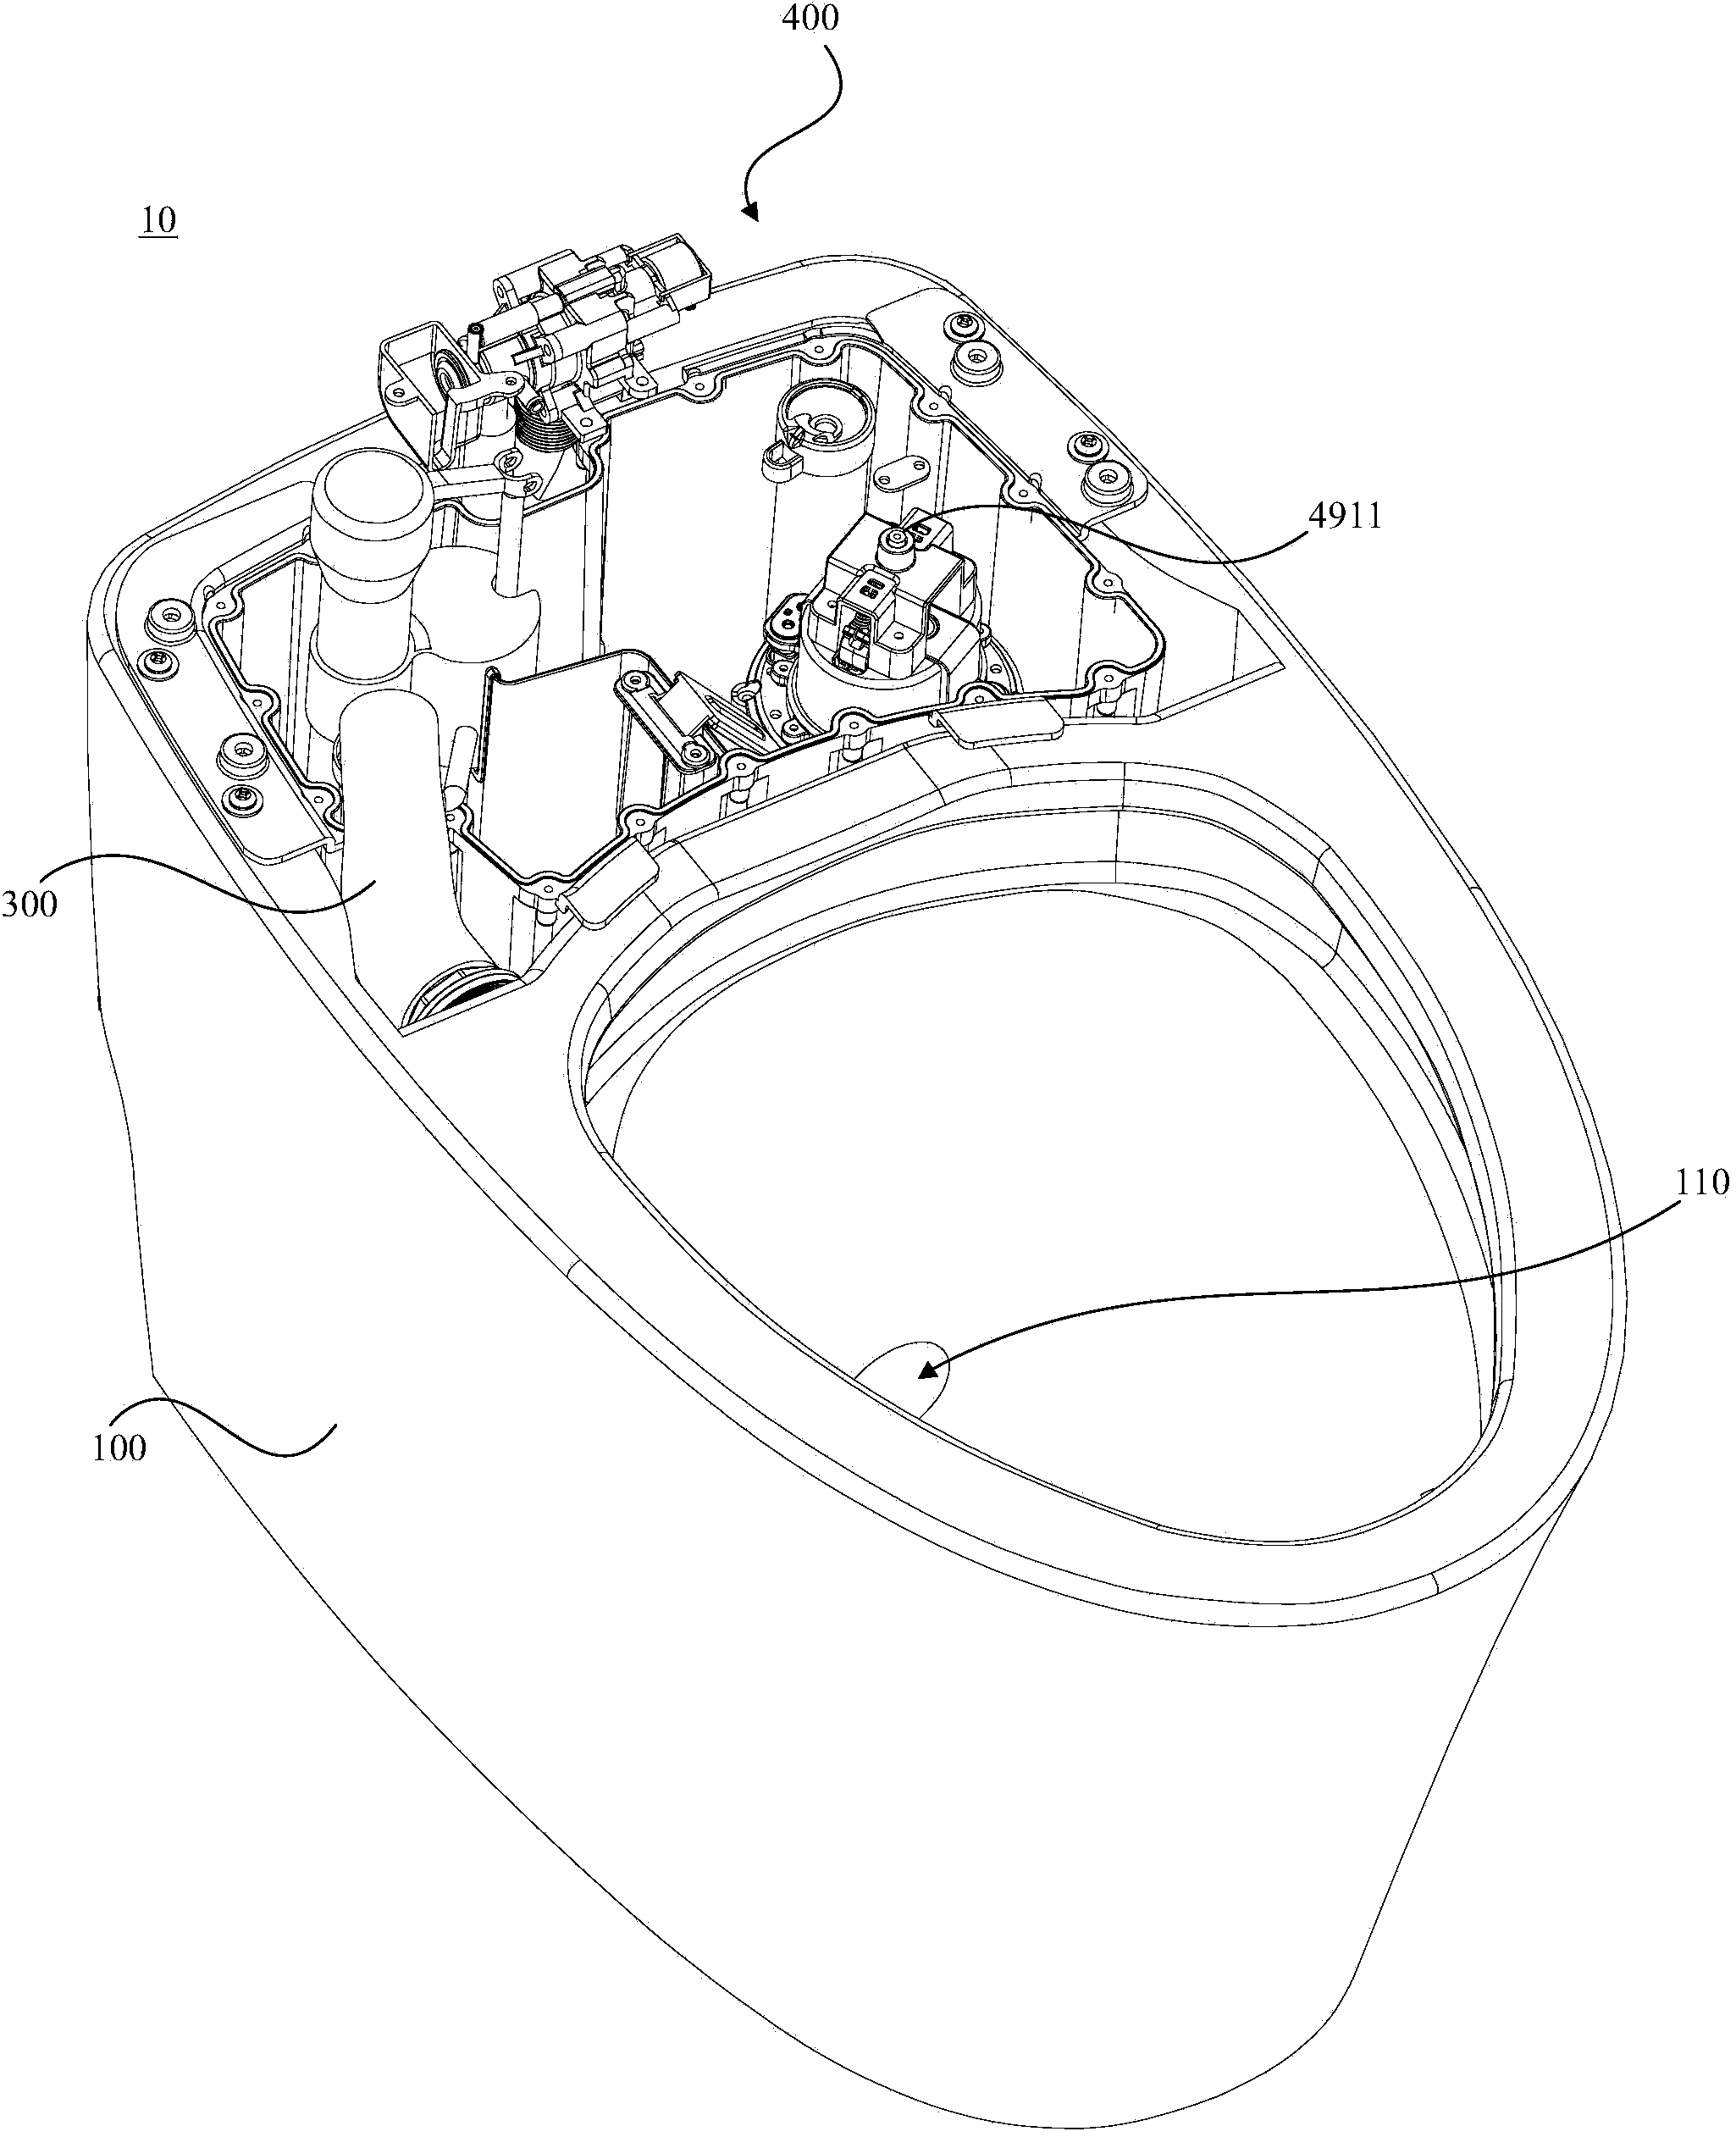 Toilet bowl and flushing system thereof